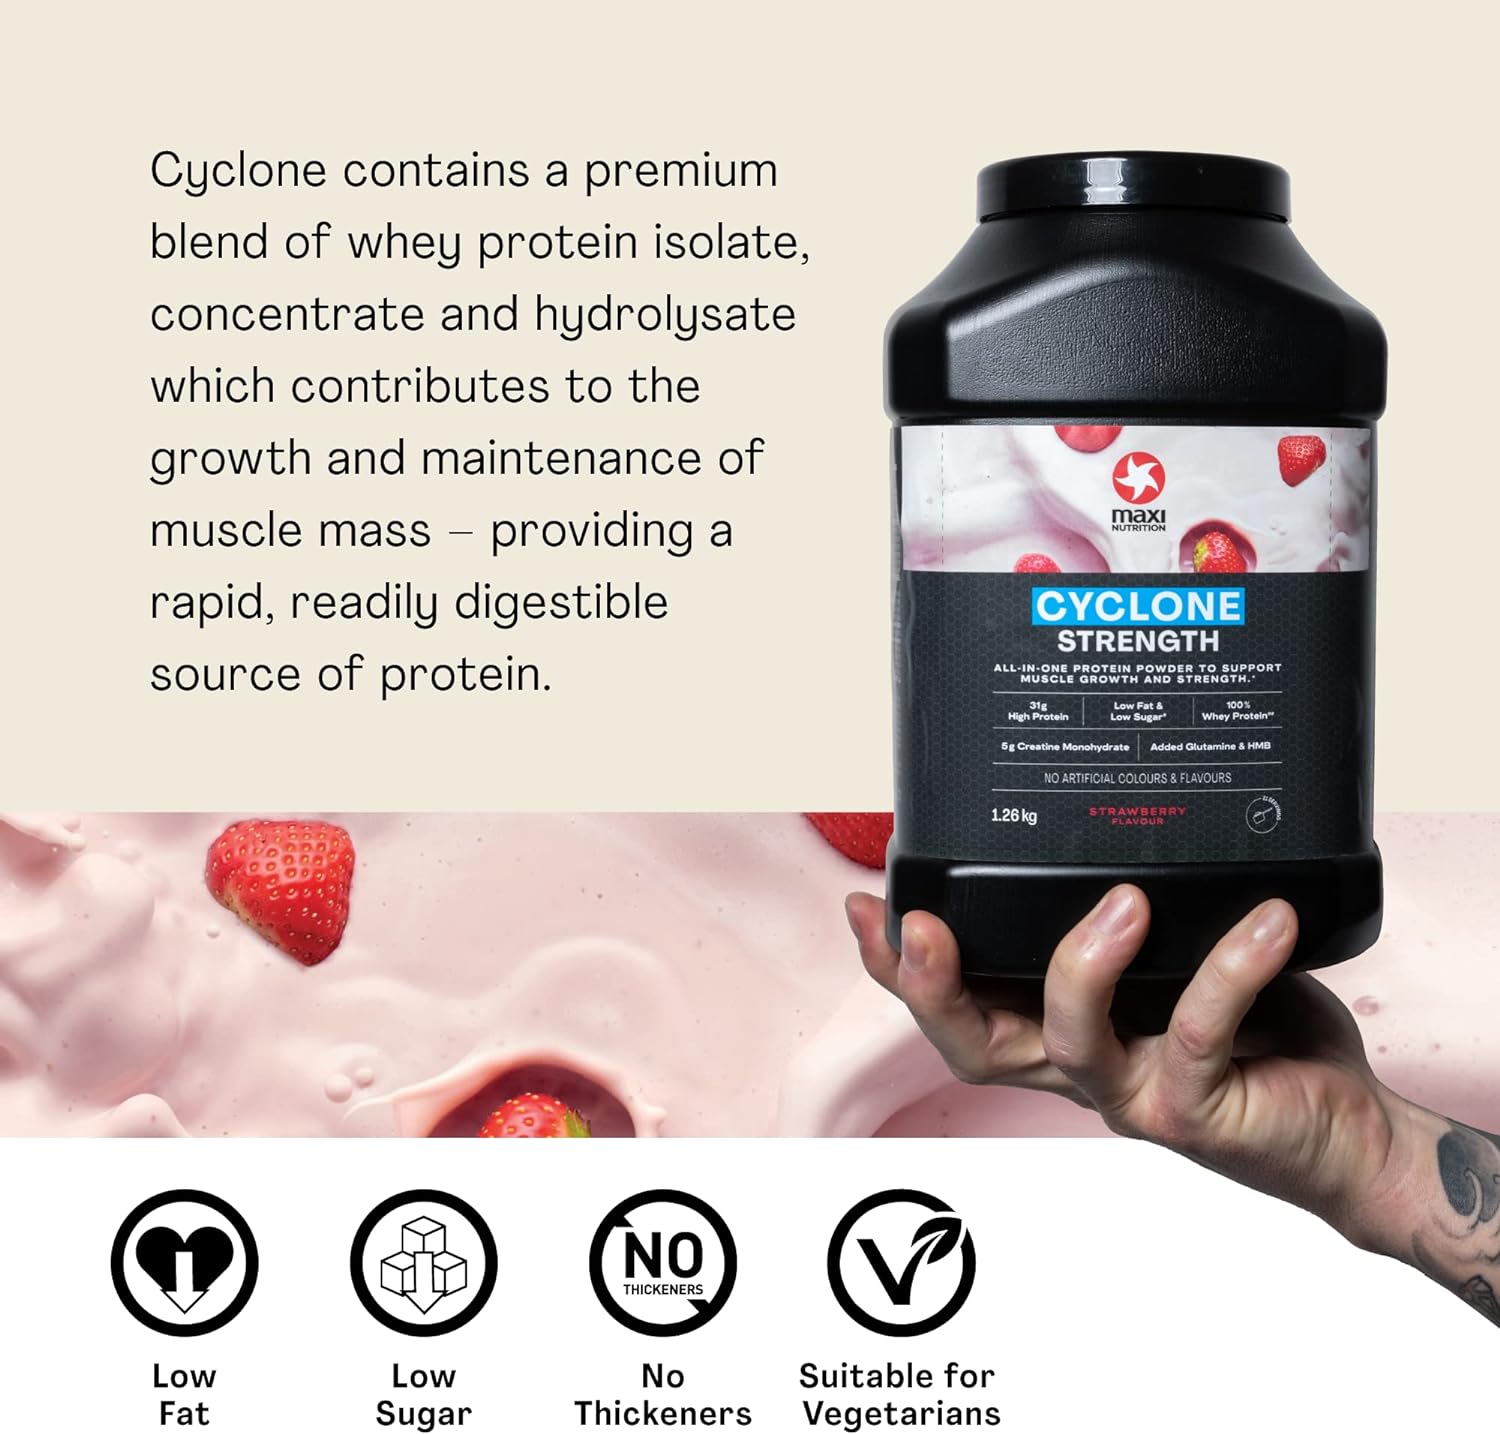 MaxiNutrition - Cyclone, Strawberry - Premium Whey Protein Powder with Added Creatine – Low in Sugar and Fat, Vegetarian-Friendly - 31g Protein, 205 kcal per Serving, 1.26kg